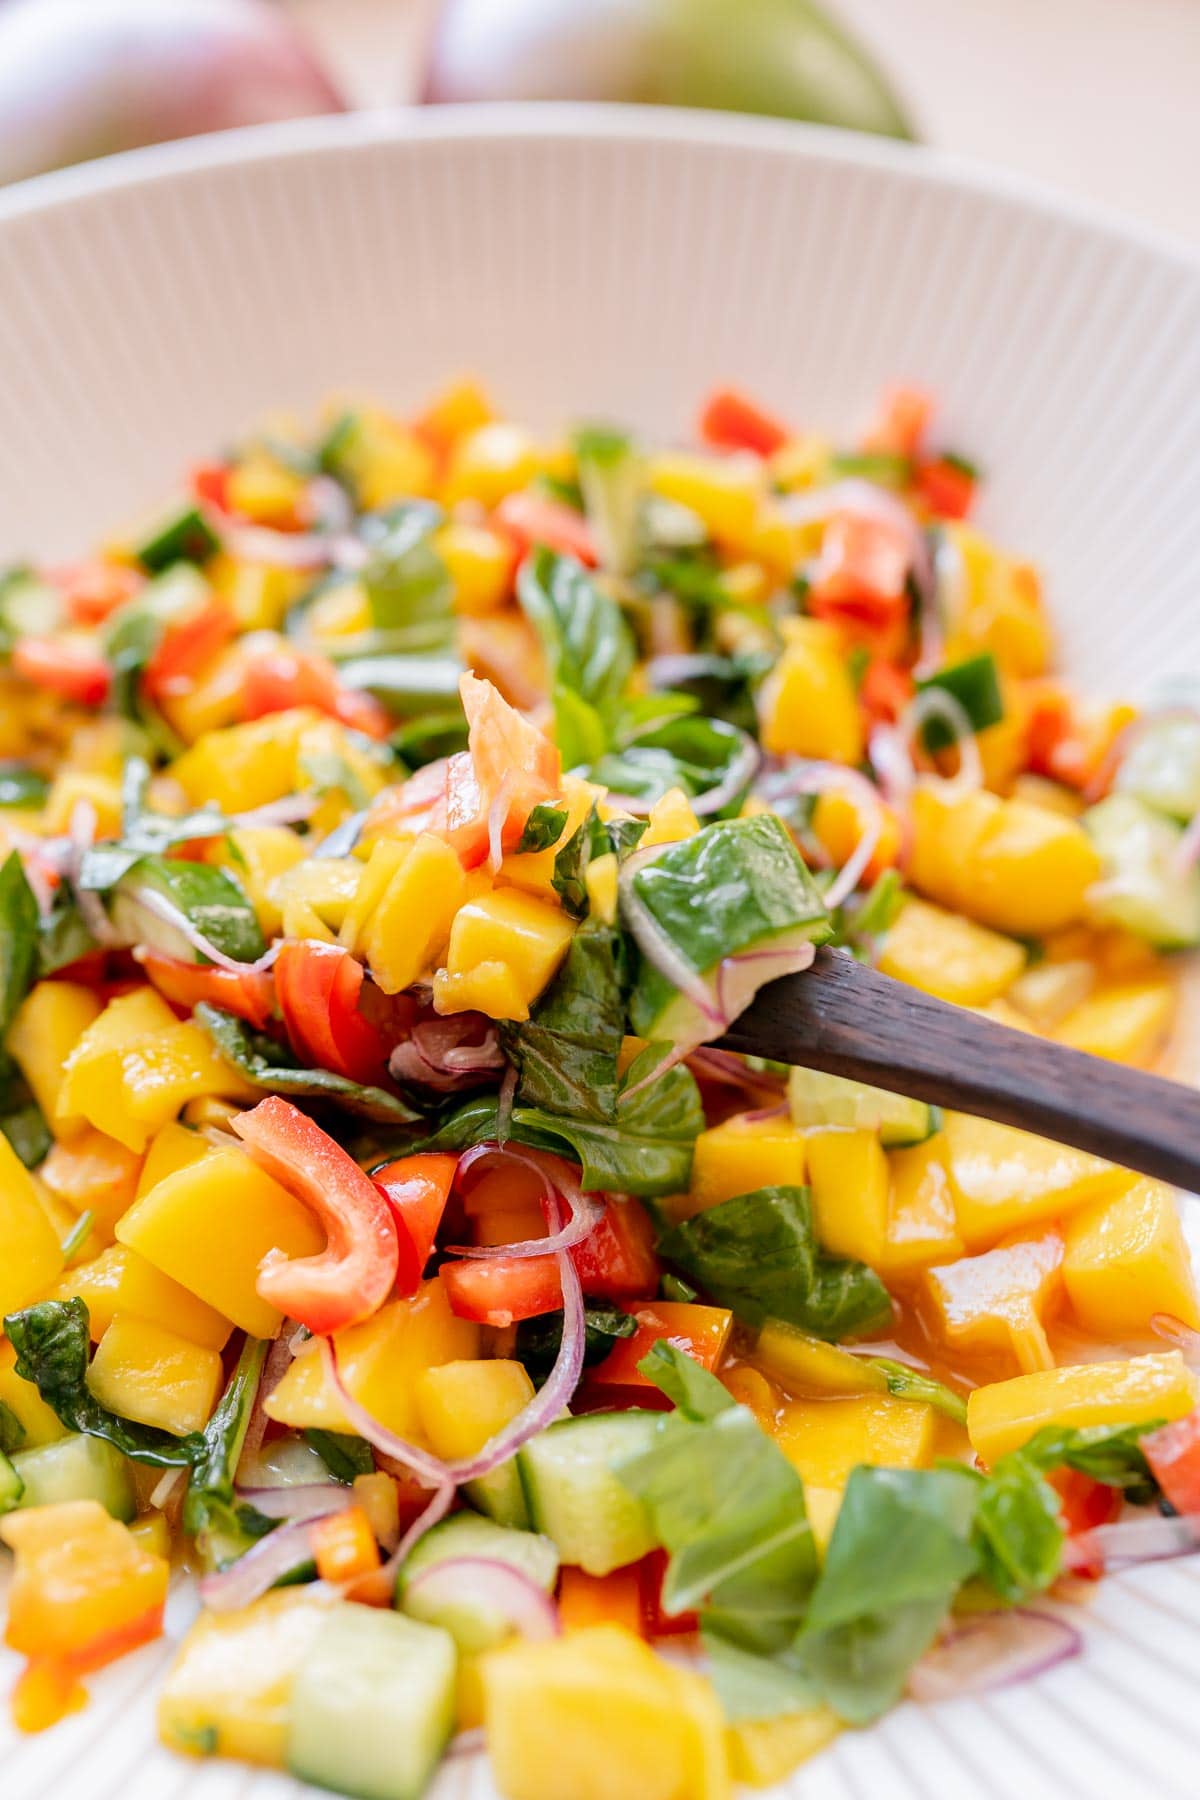 A wooden spoon scooping mango salad out of a bowl.